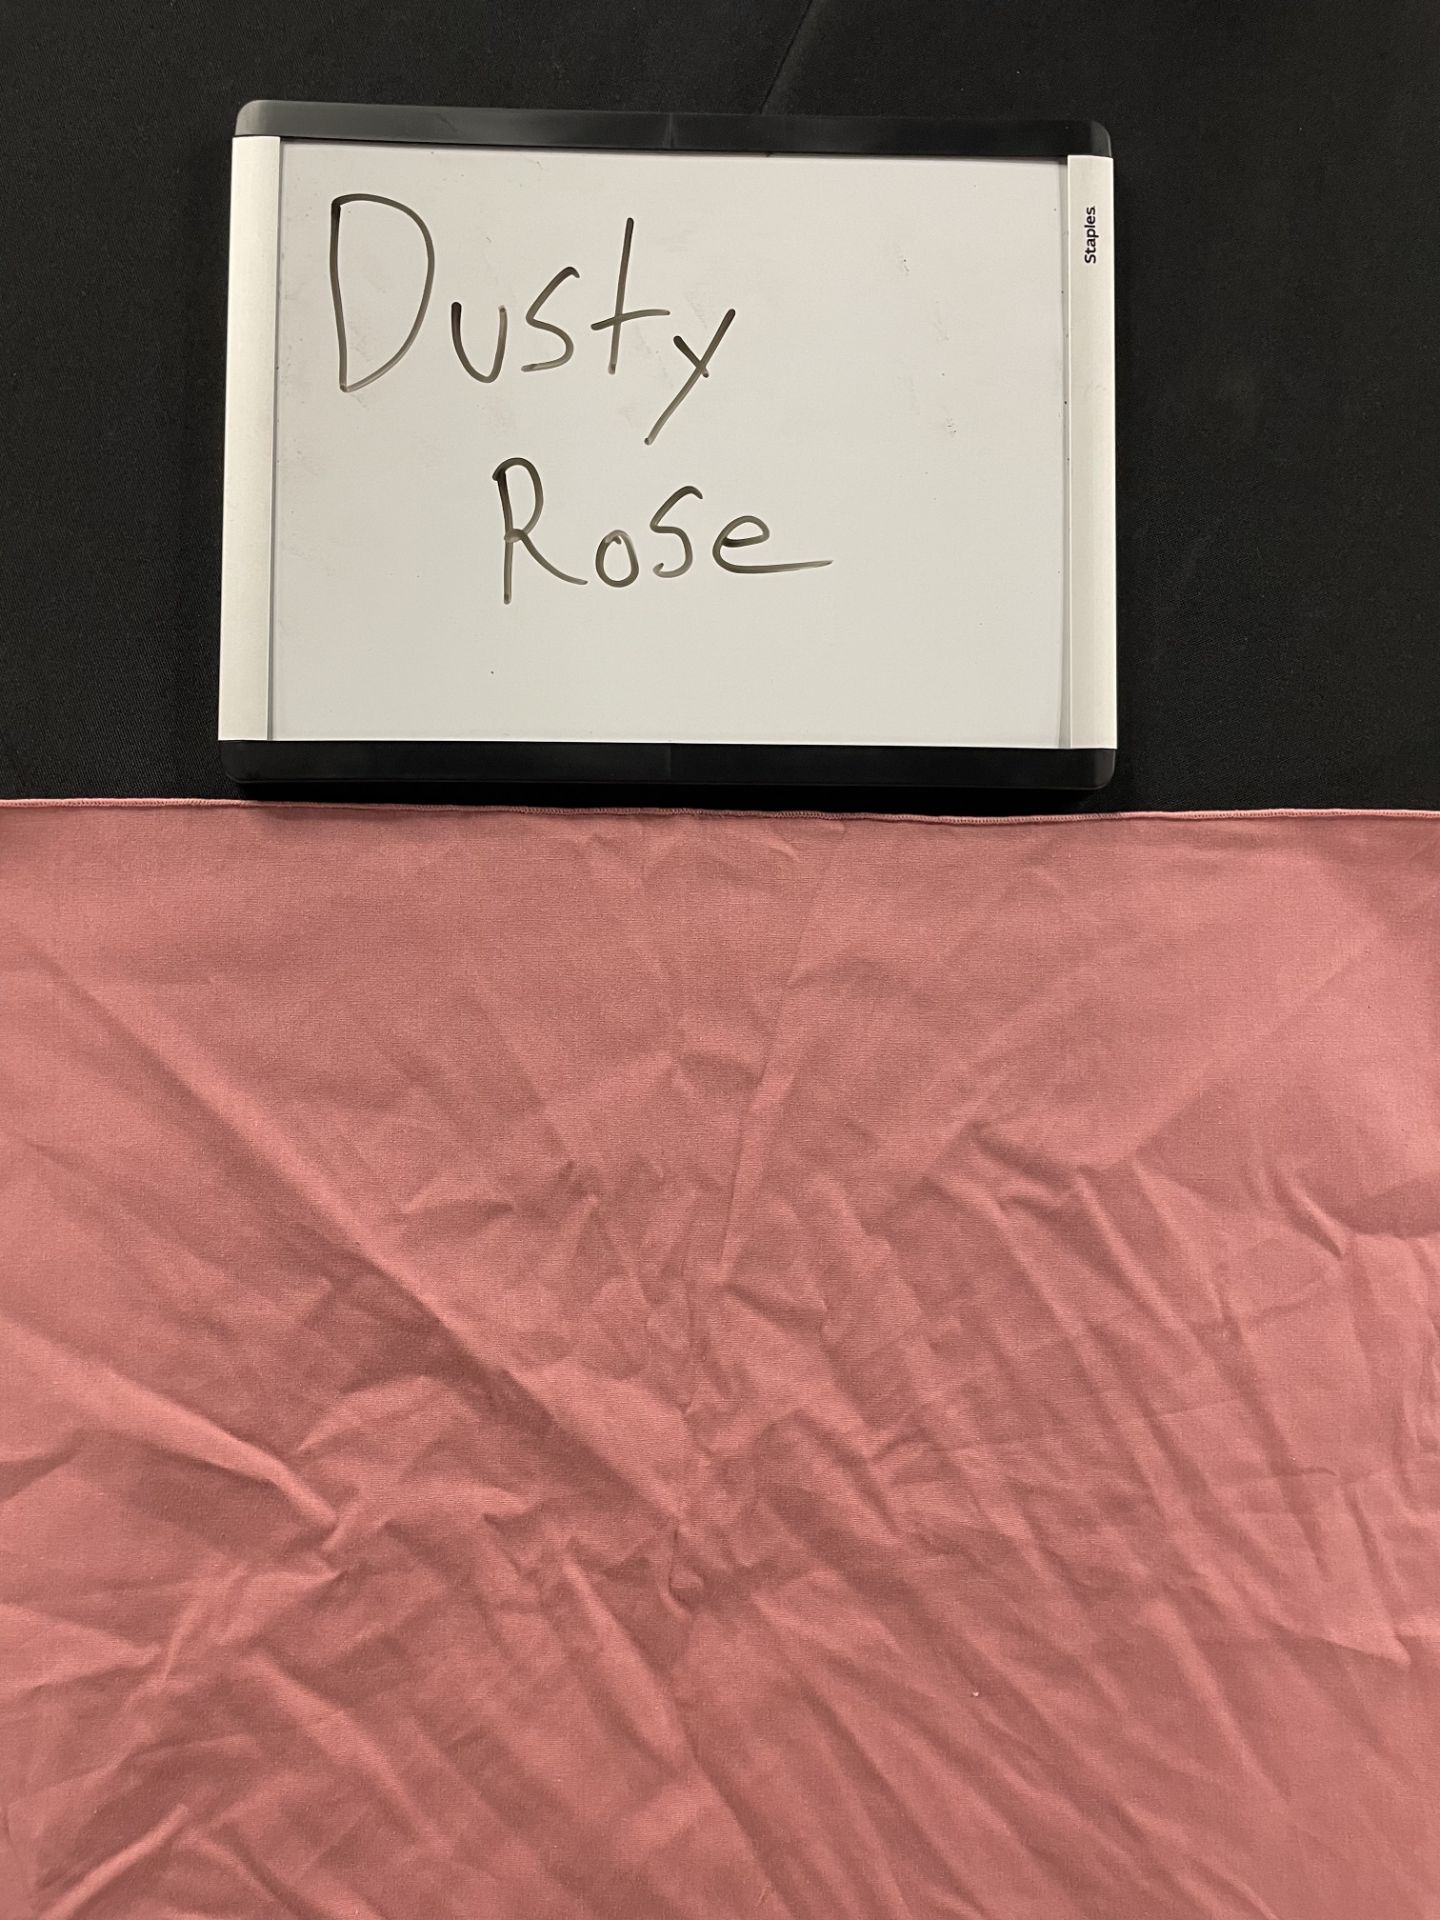 TABLECLOTH DUSTY ROSE 72"X120" POLY